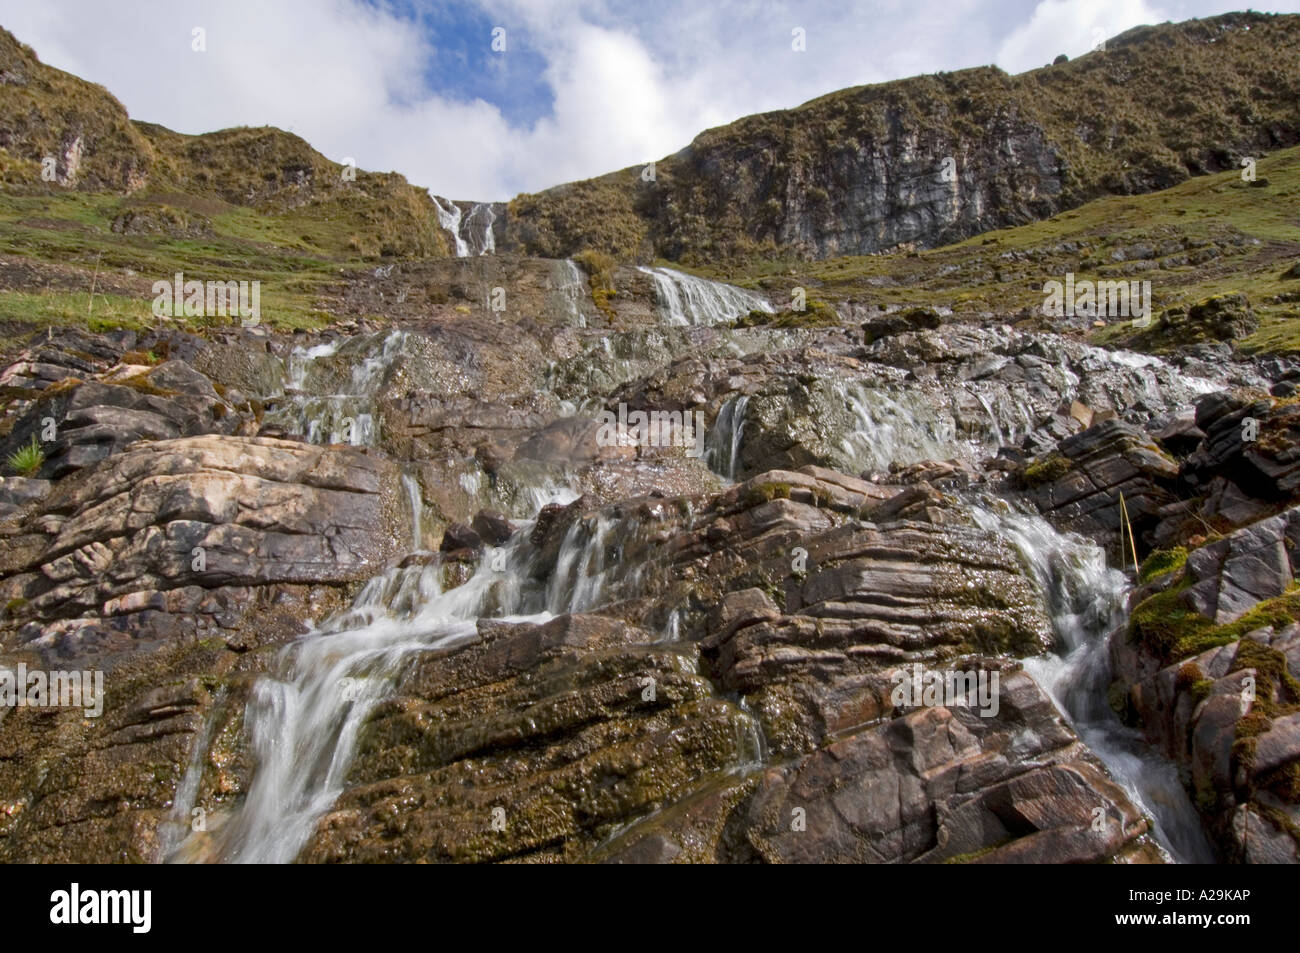 A waterfall and rugged scenery while on the 'community' Inca trail with a slow shutter speed to blur the motion. Stock Photo